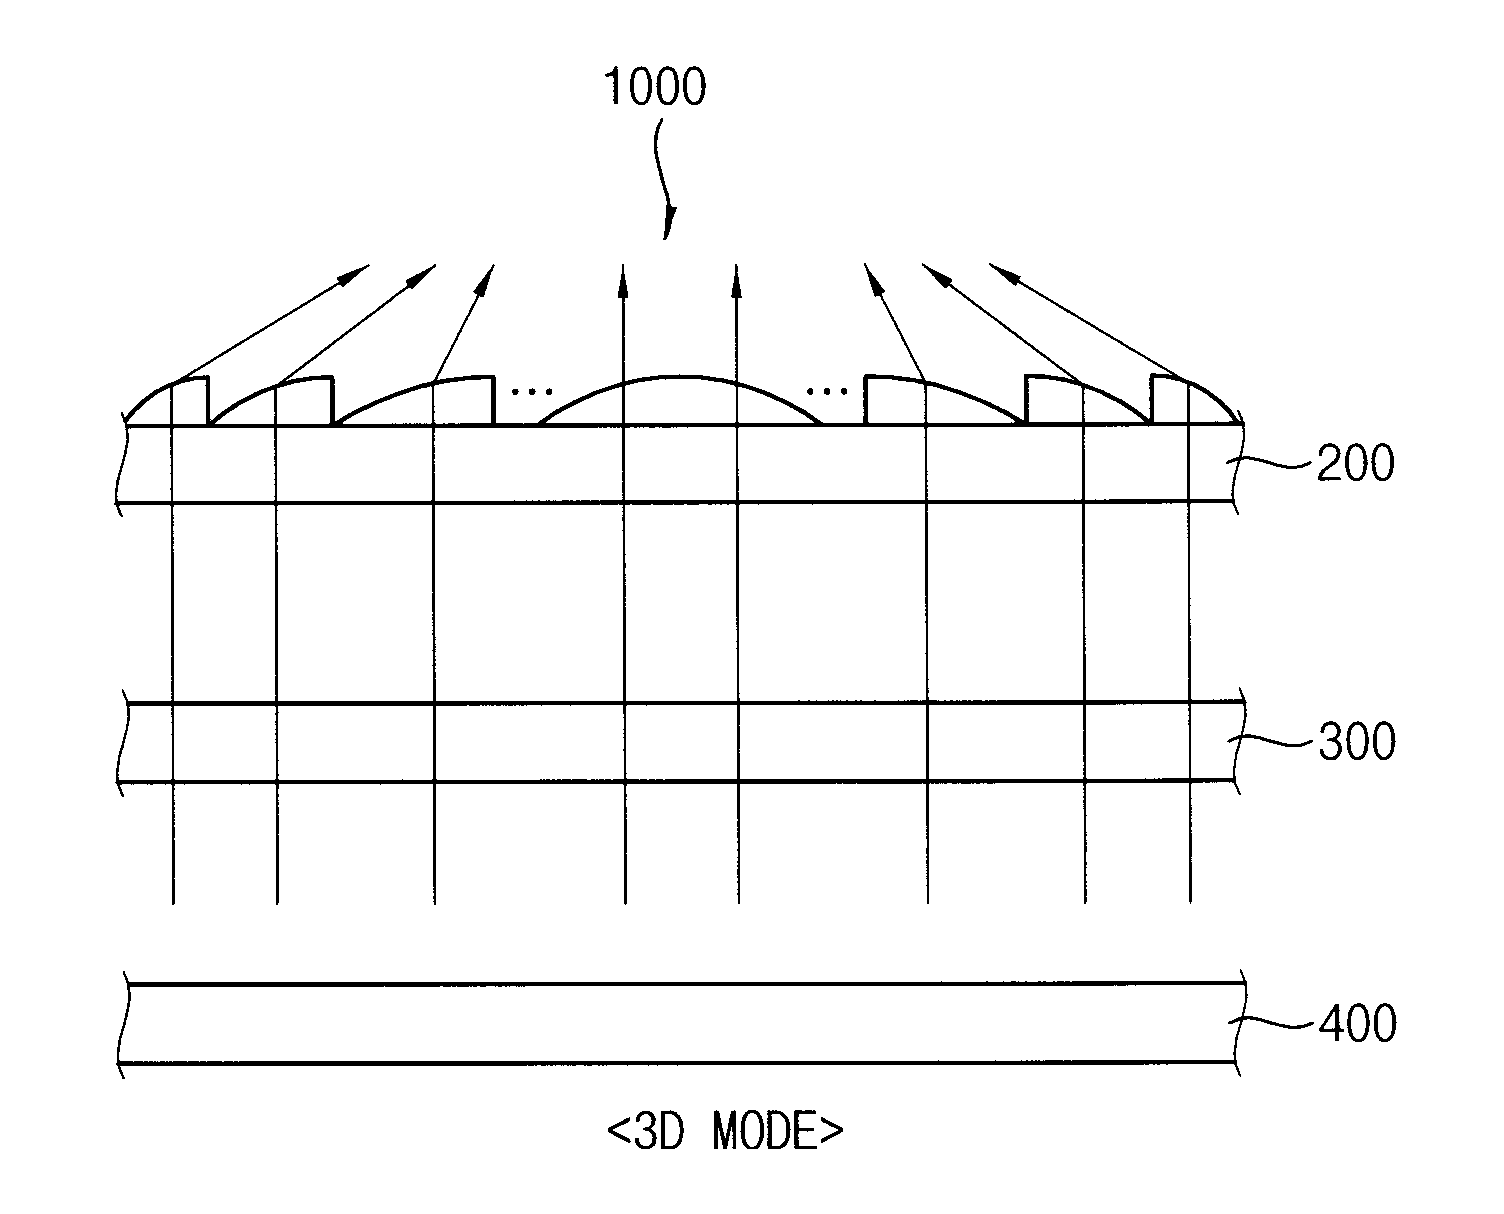 Lens panel, method for manufacturing lens panel, and display apparatus having lens panel